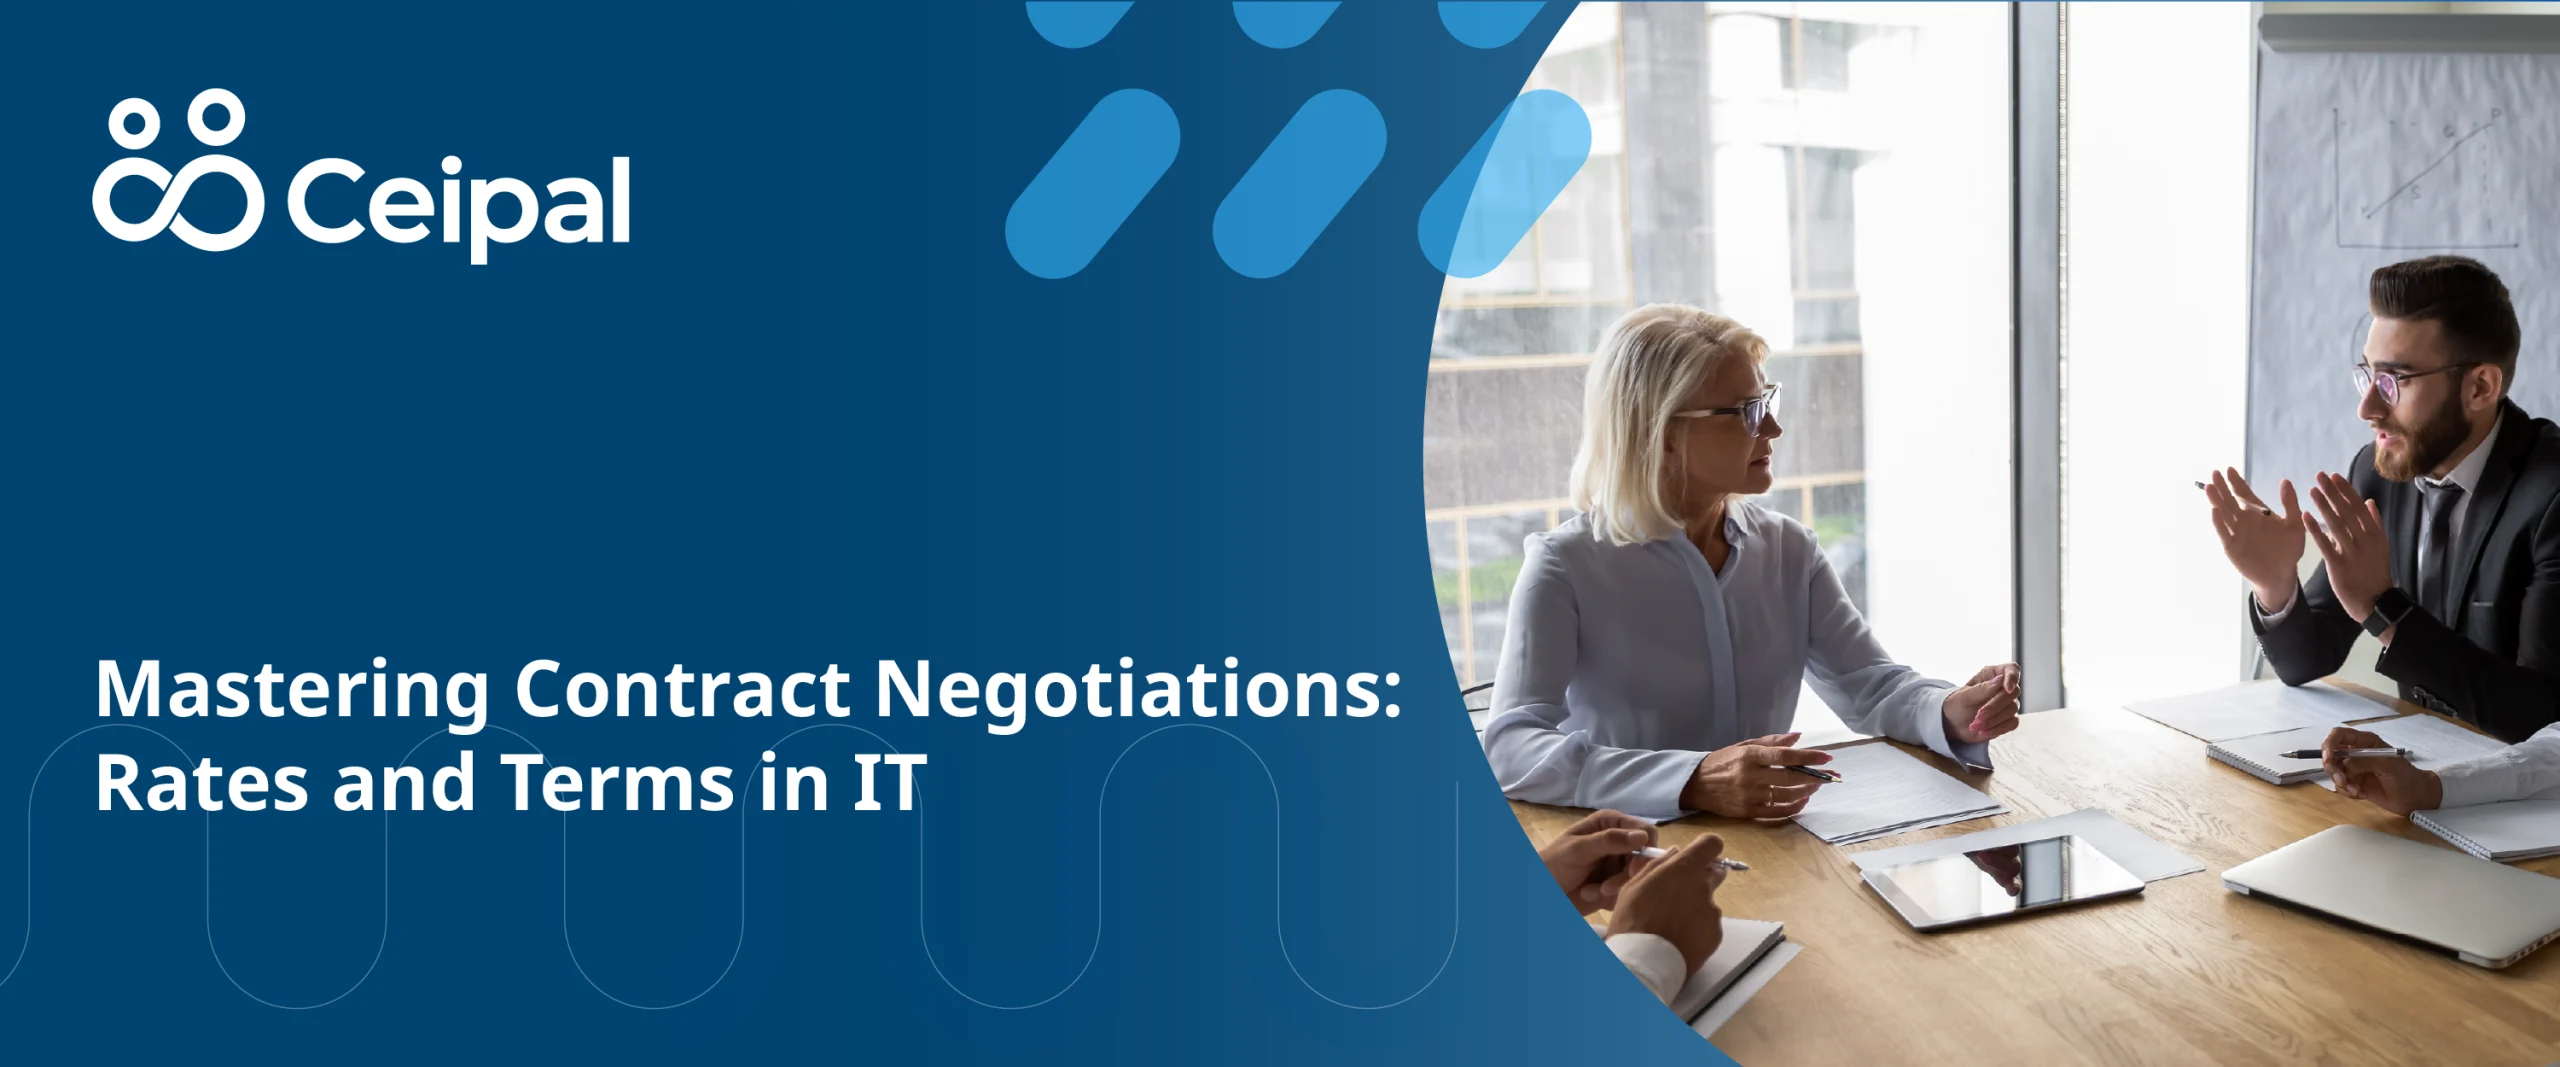 Mastering Contract Negotiations: Rates and Terms in IT